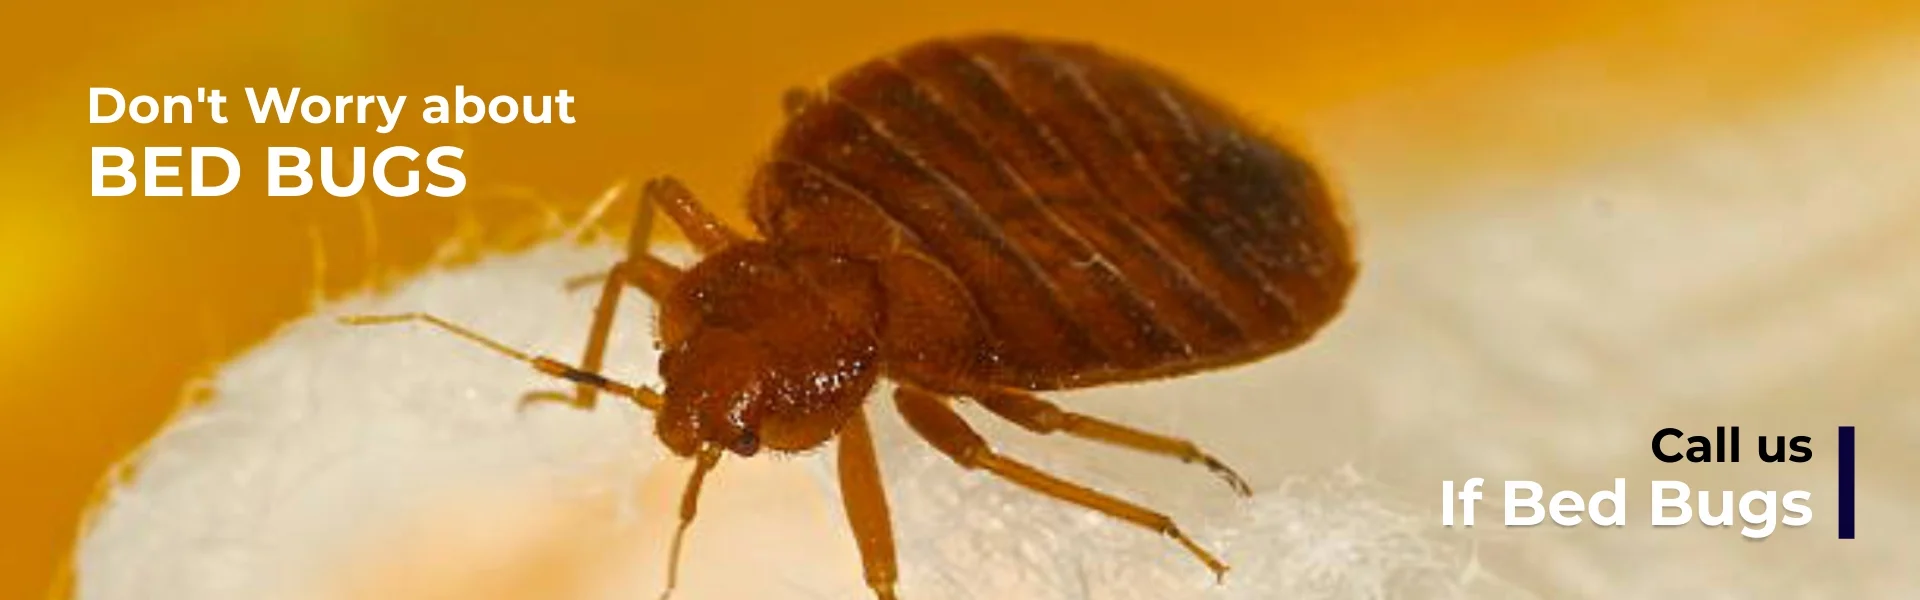 Bed bugs control services in Chennai